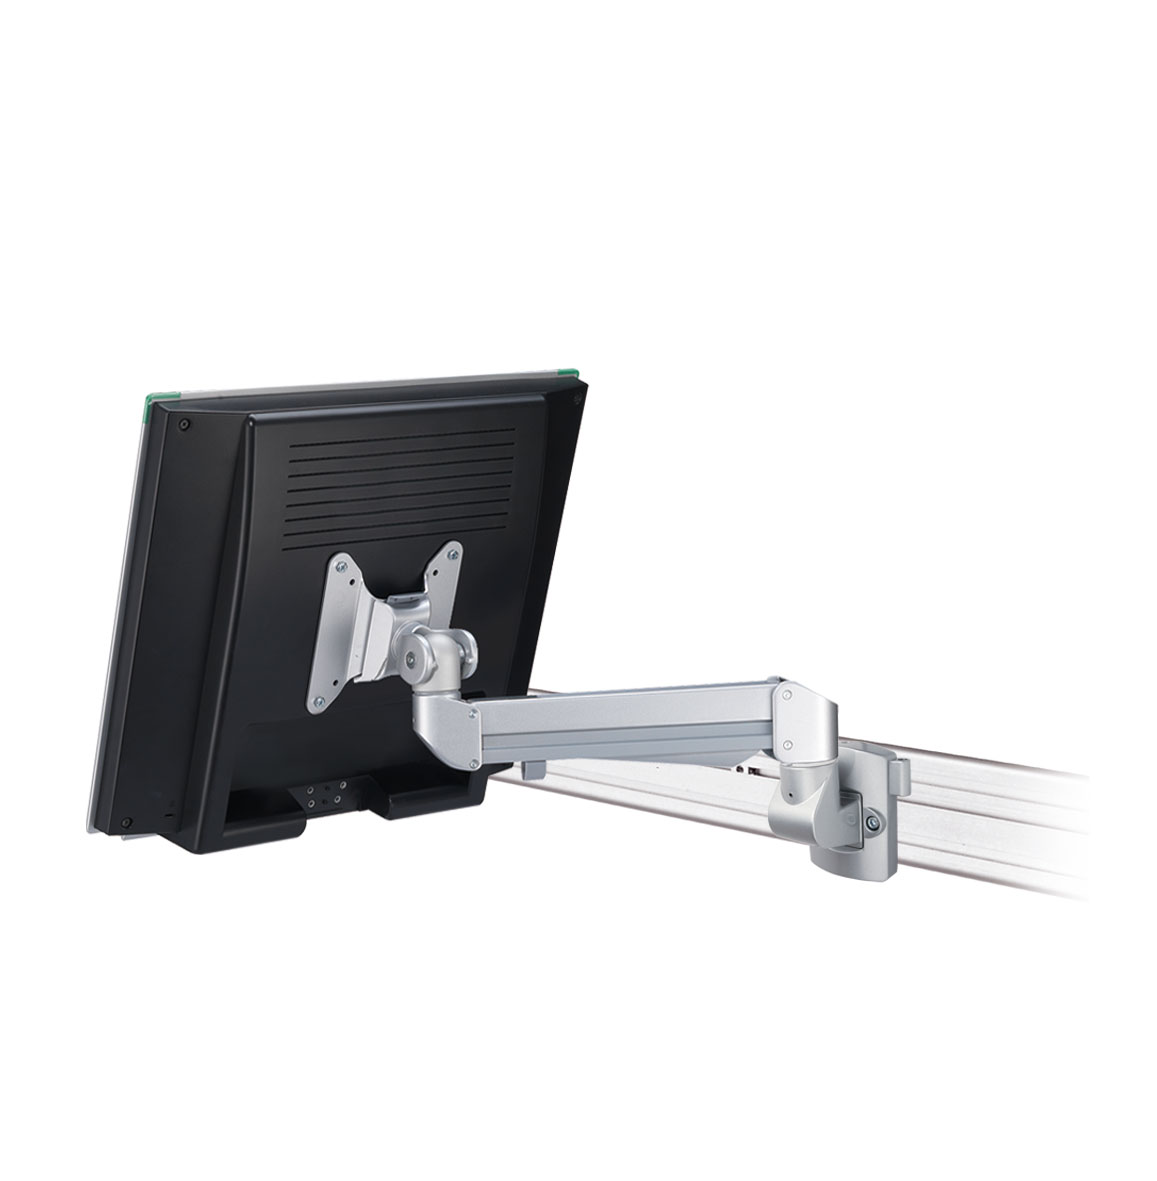 Desk Monitor Stand - Monitor Arm EA-119 for toolbar system